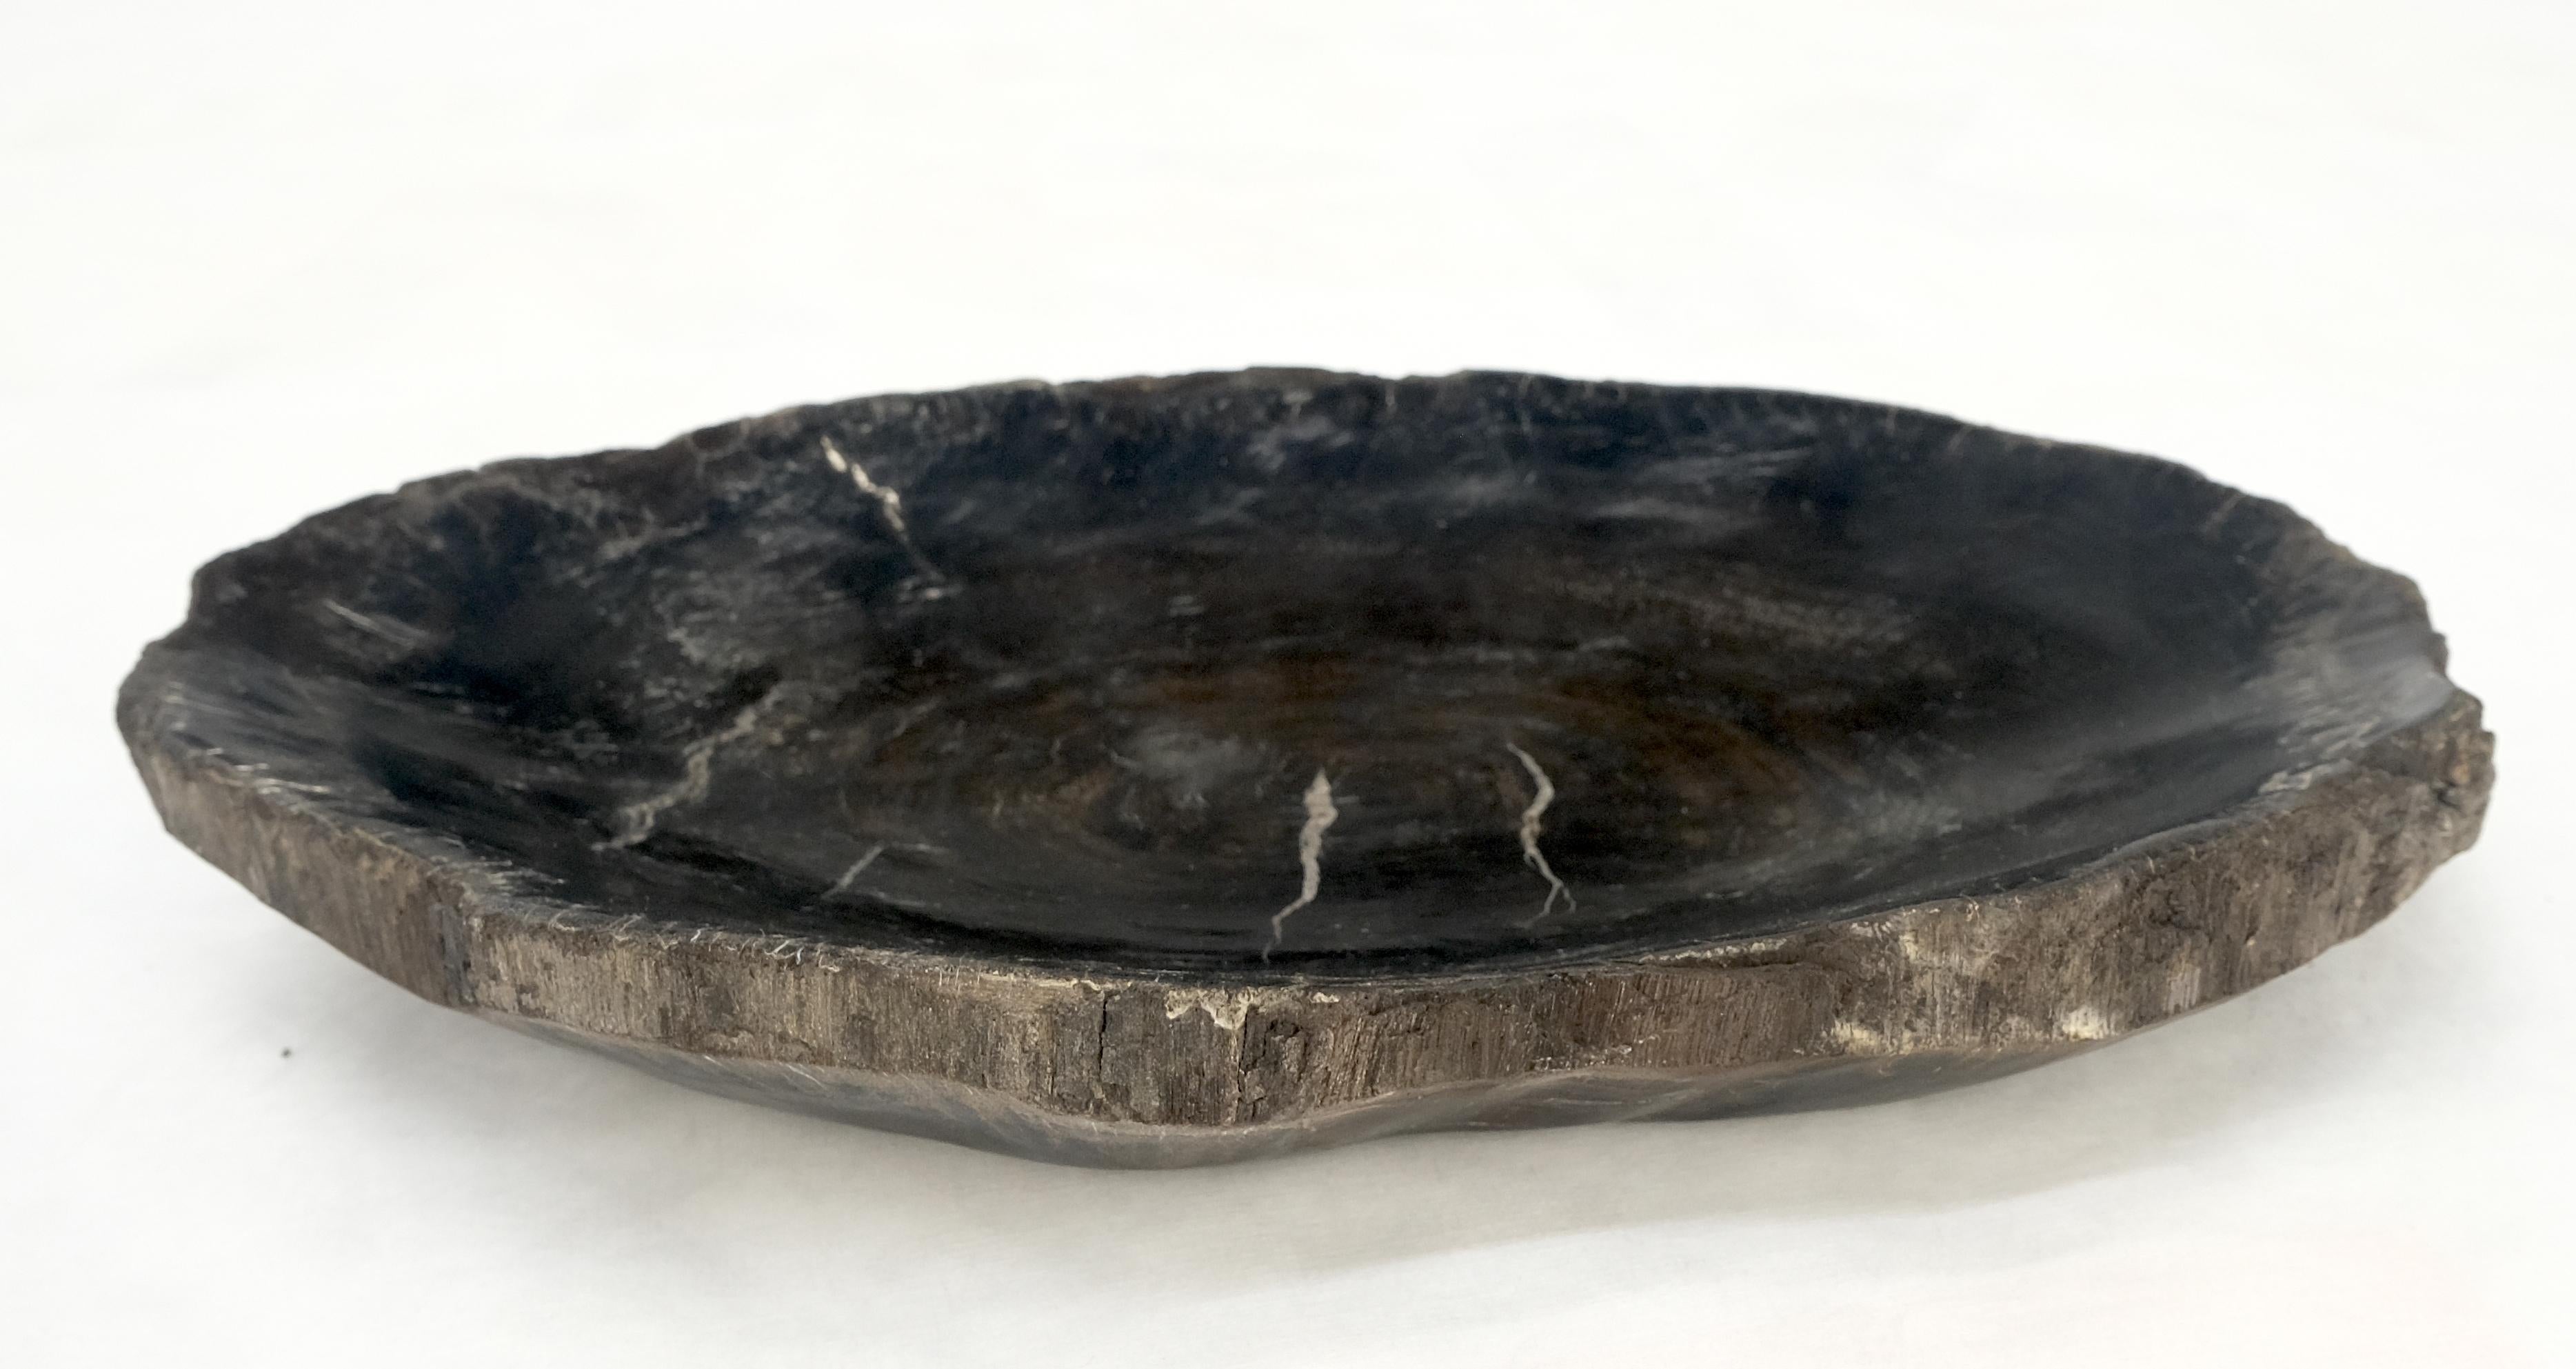 Indonesian Petrified Wood Oyster Shape Solid Black Oval Bowl Dish Large Plate Ashtray For Sale